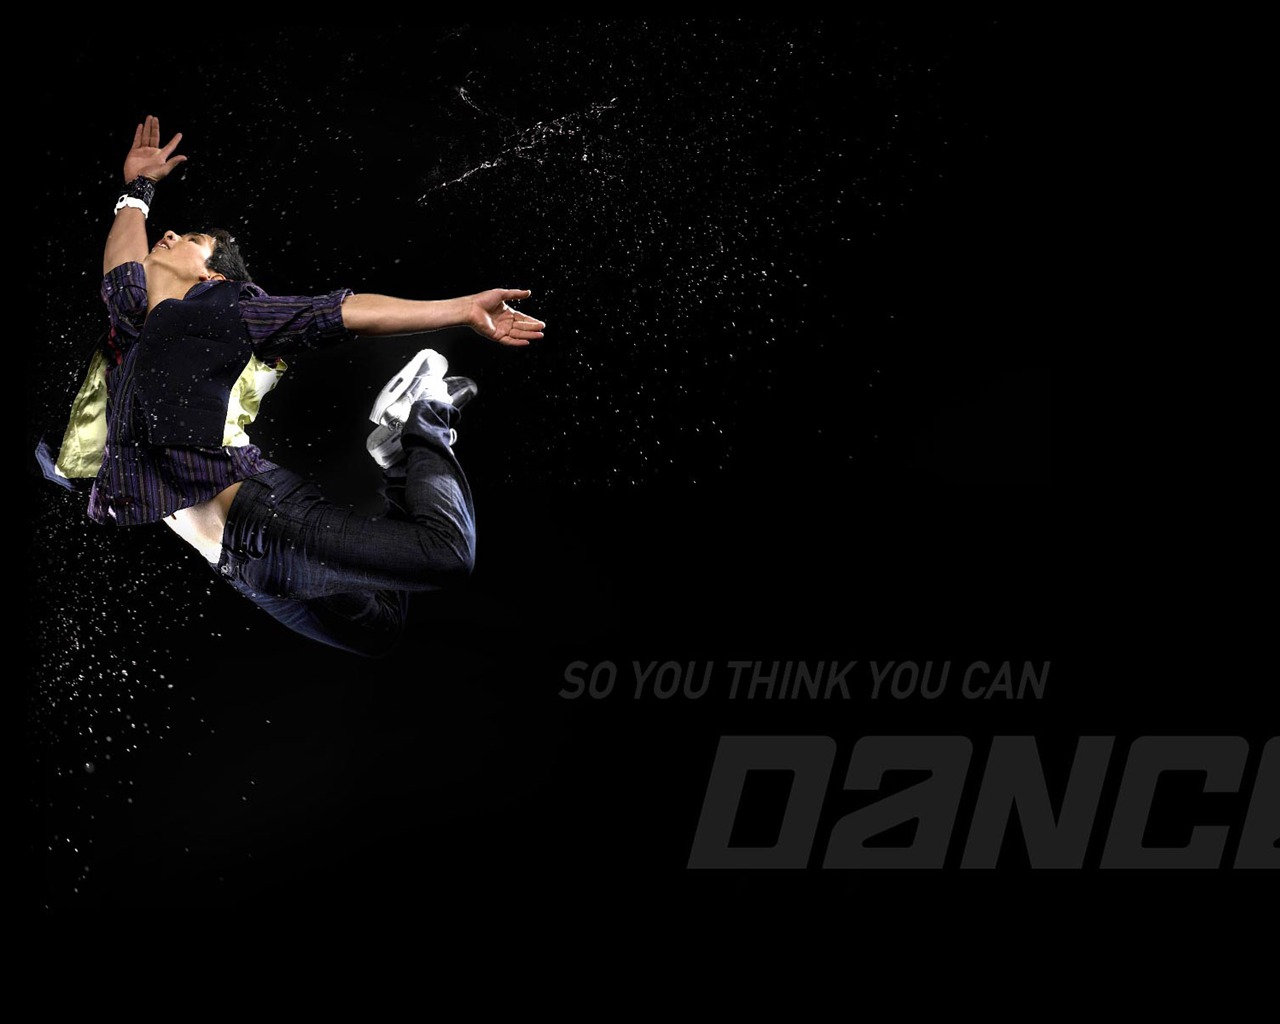 So You Think You Can Dance wallpaper (1) #8 - 1280x1024